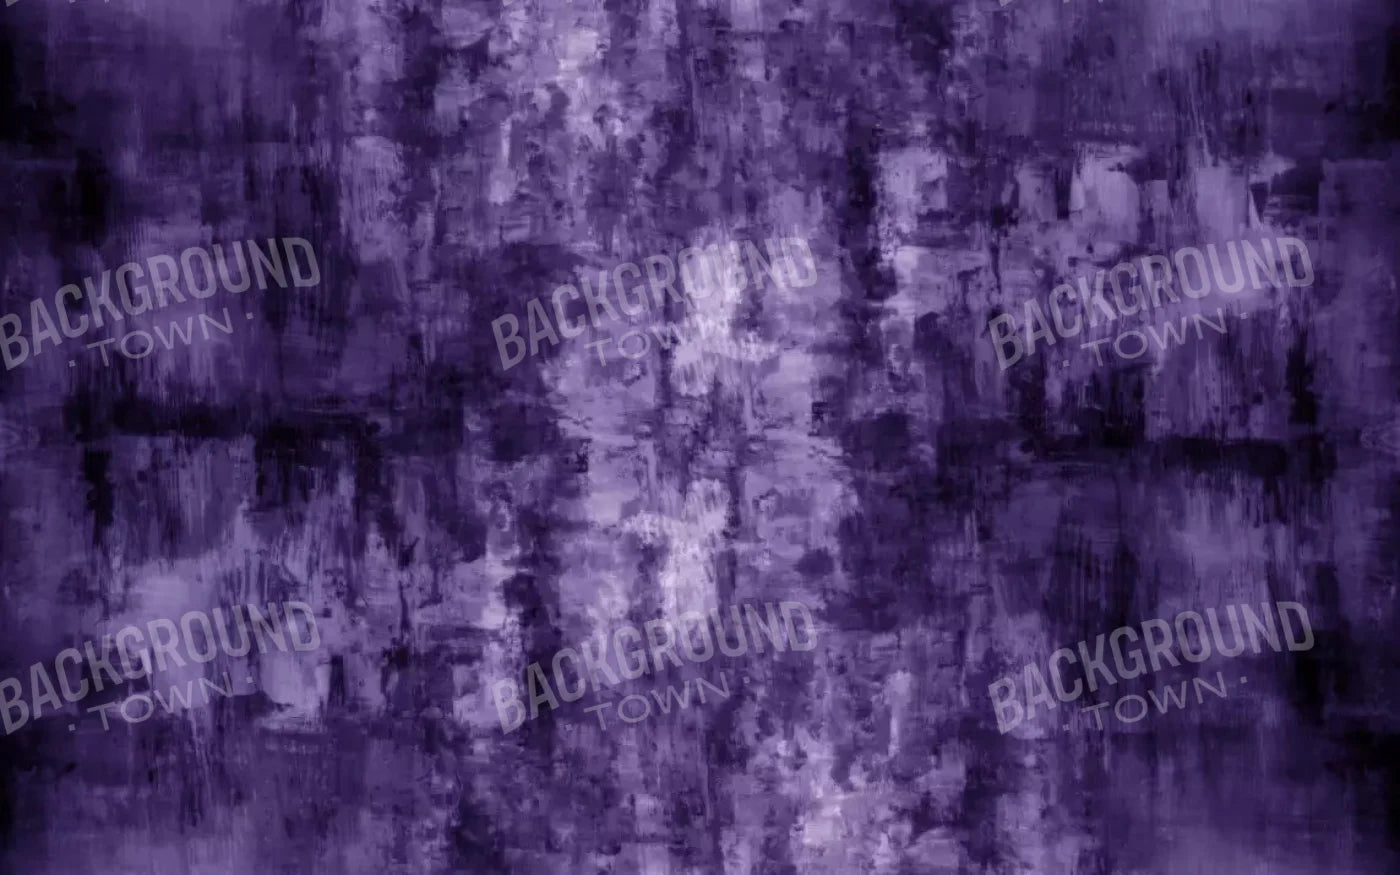 Becker Violet 14X9 Ultracloth ( 168 X 108 Inch ) Backdrop